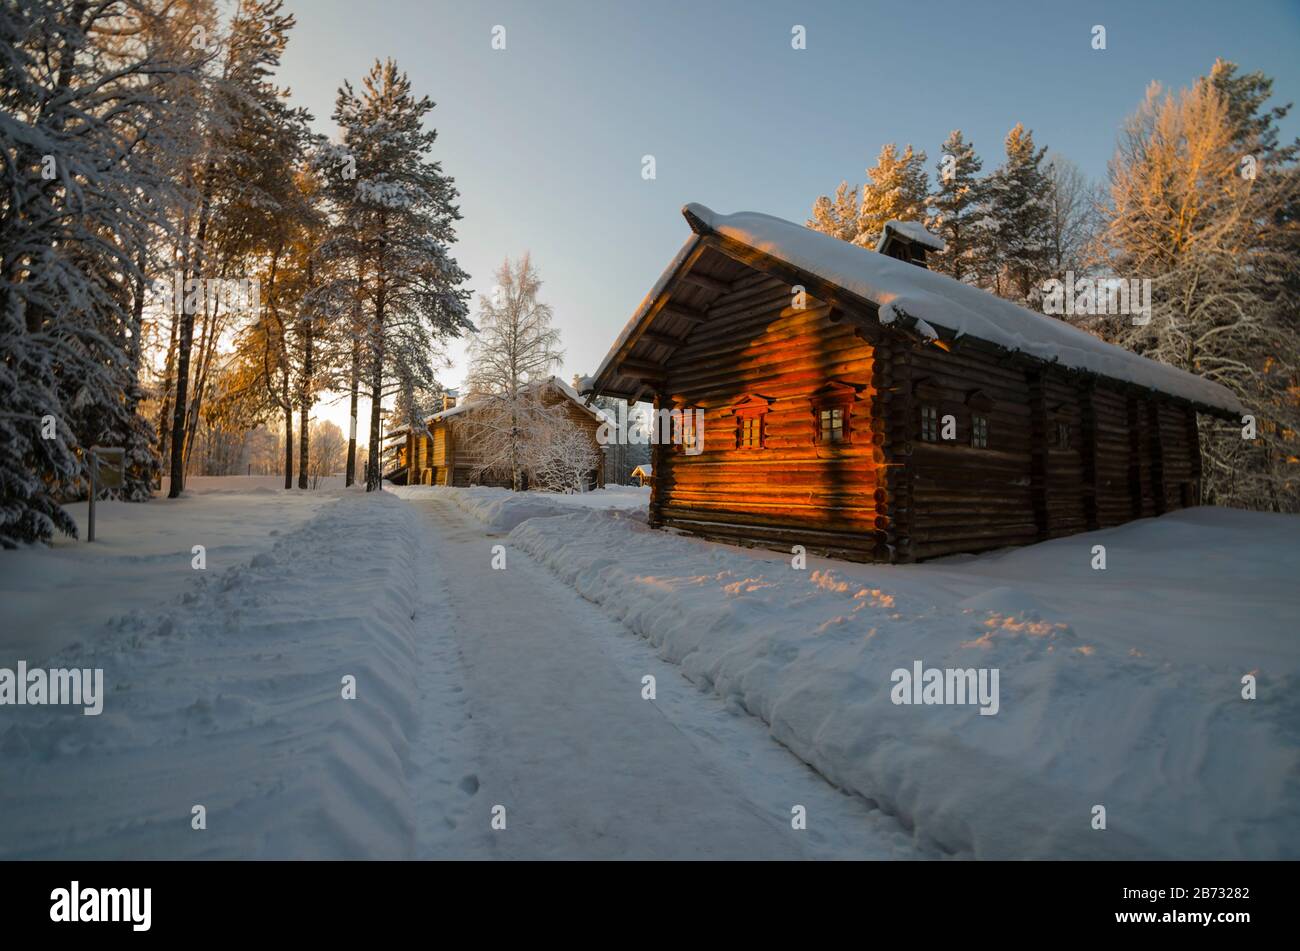 Wooden huts in the museum of wooden architecture 'Small Korely'. Sunset in the village. Russia, Arkhangelsk region Stock Photo